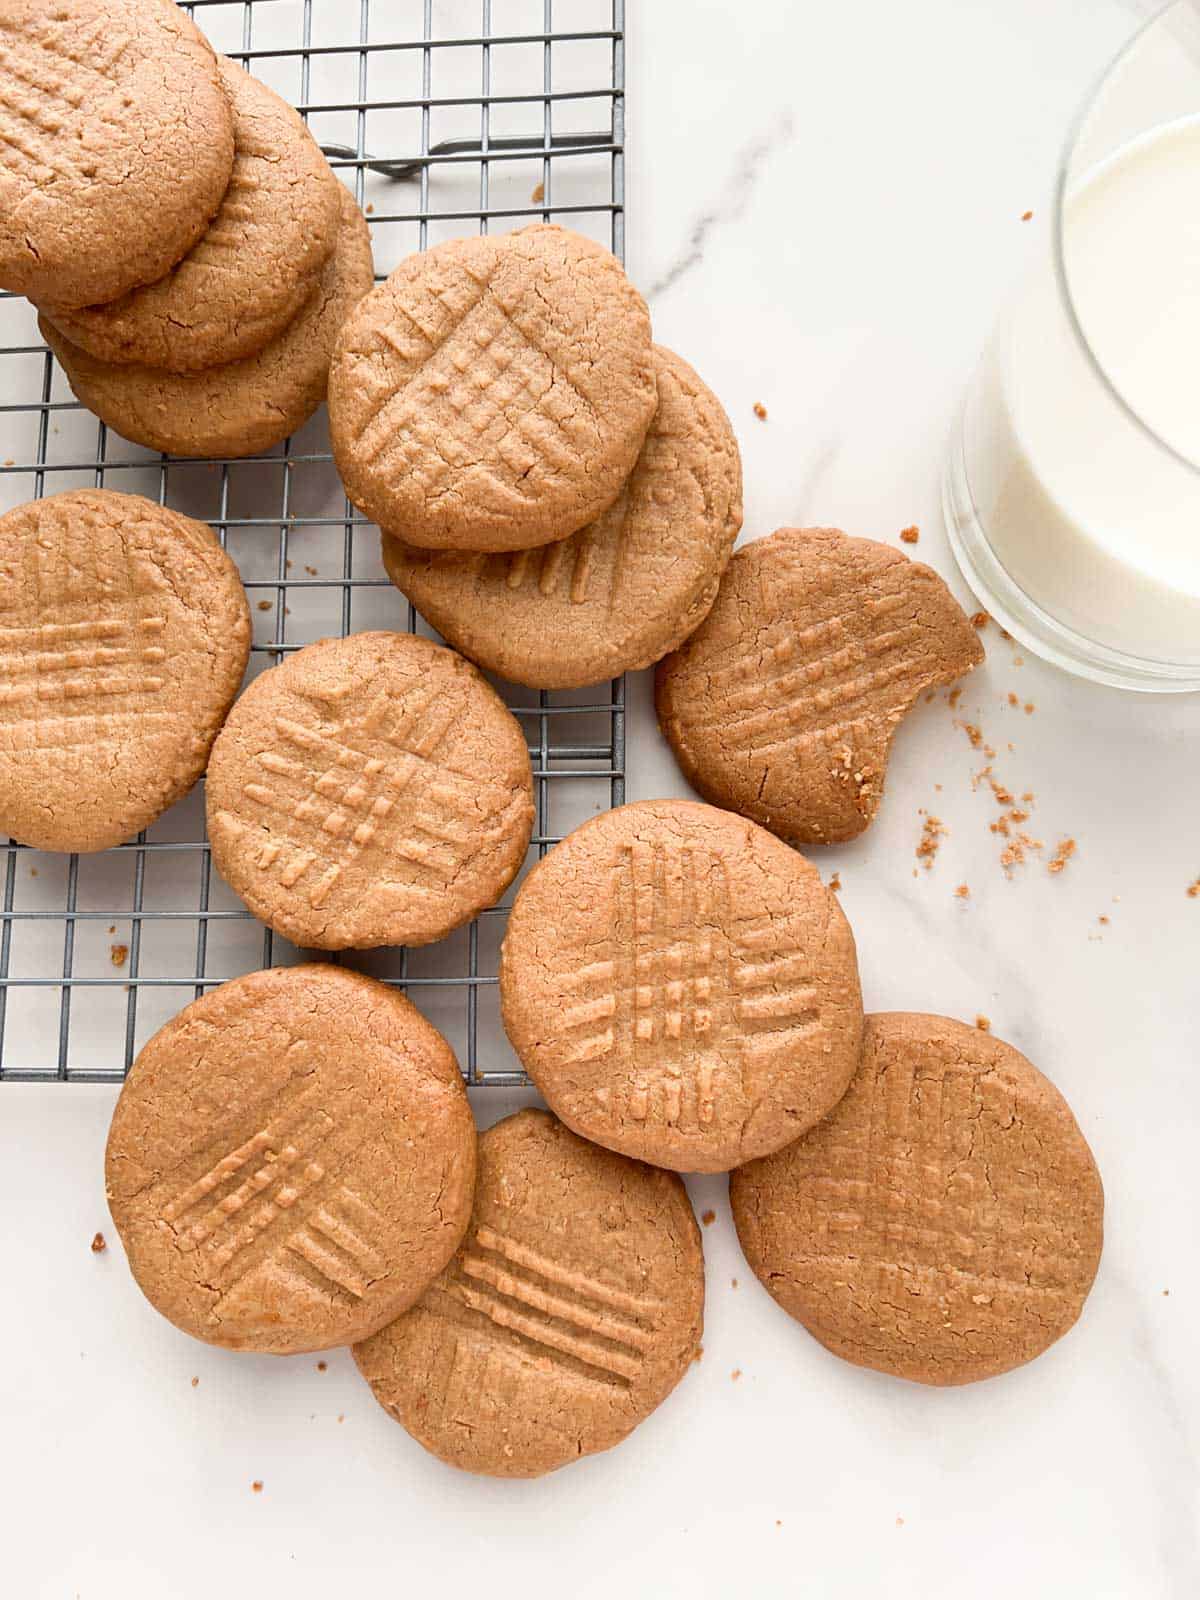 Peanut butter cookies on a cooling rack with a glass of milk to the side.